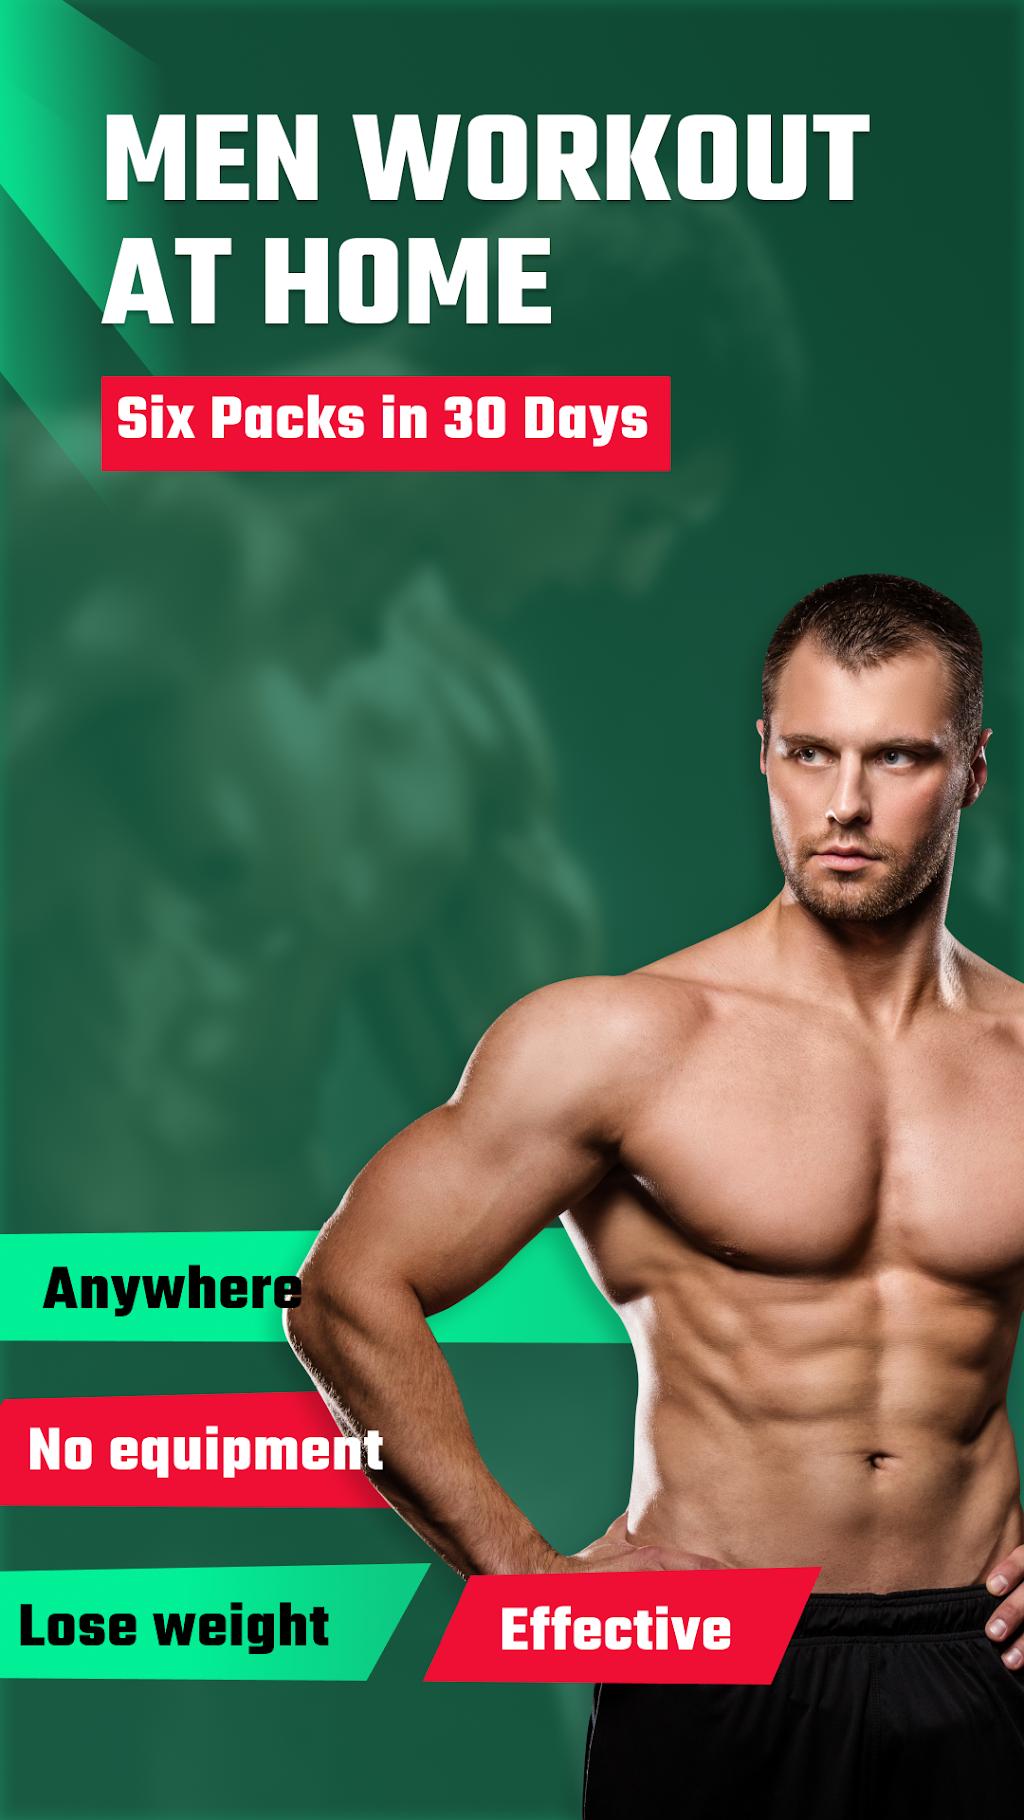 Men-Workout-at-Home-Six-Packs-in-30-Days.1.jpg